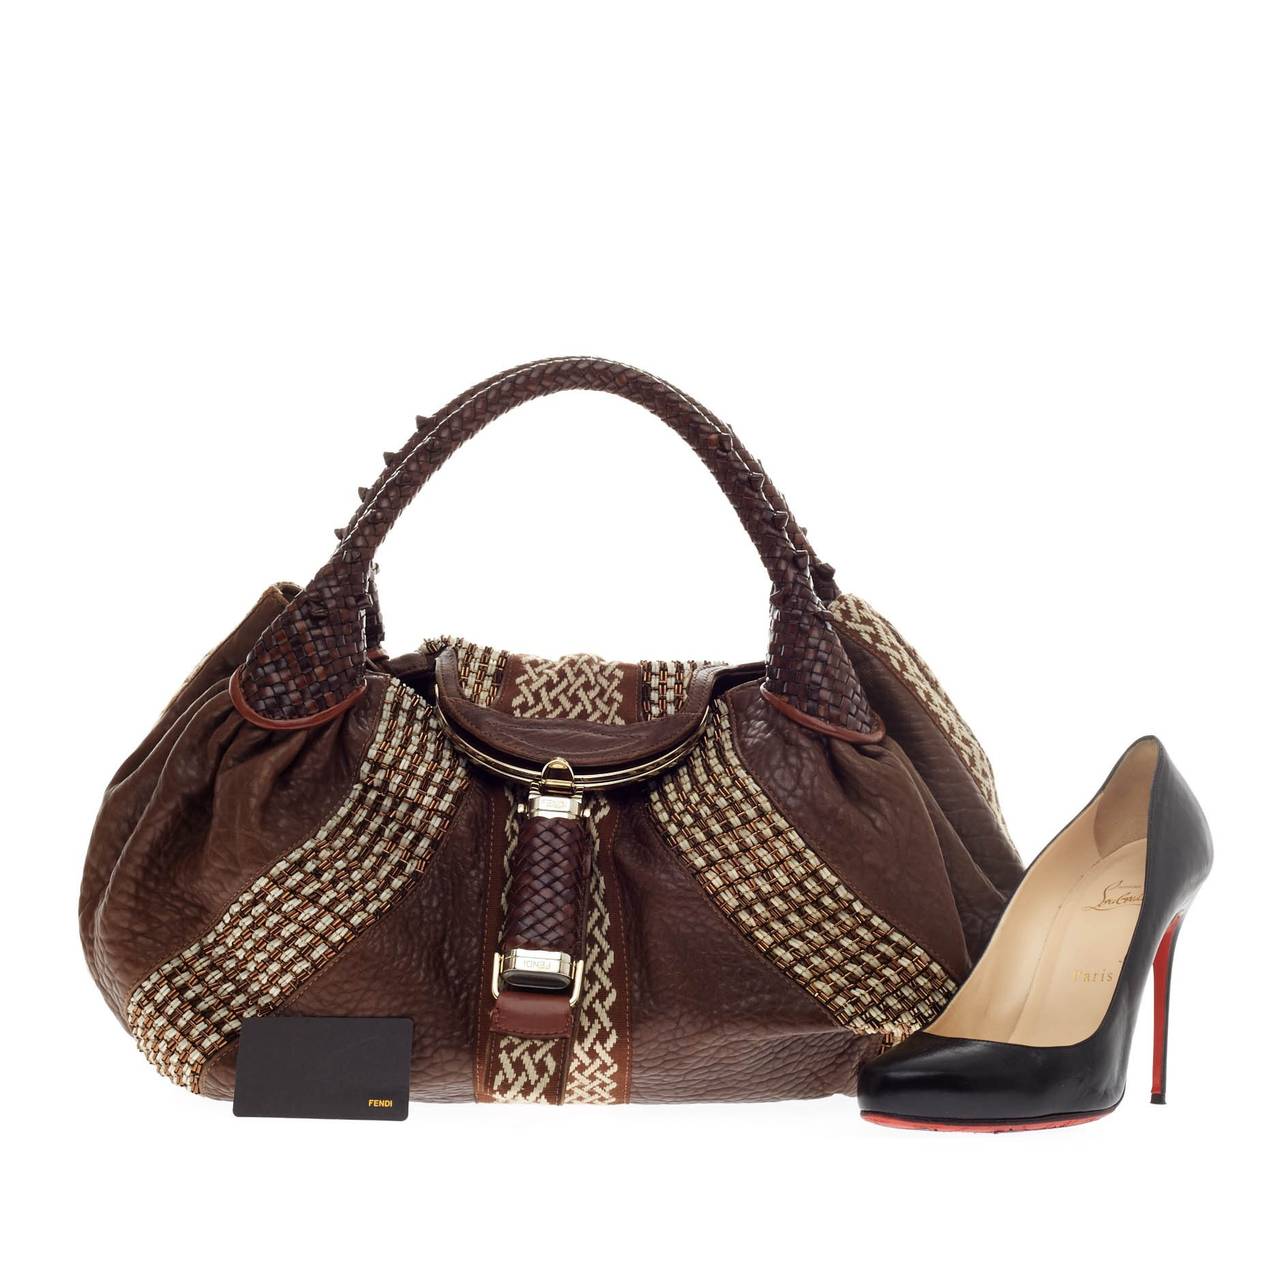 This authentic Fendi Spy Bag Beaded Leather showcases one of the brand's most popular designs. Constructed from rich brown leather with white and copper bead detailing, this alluring bag features spiked braided woven leather handles and a 